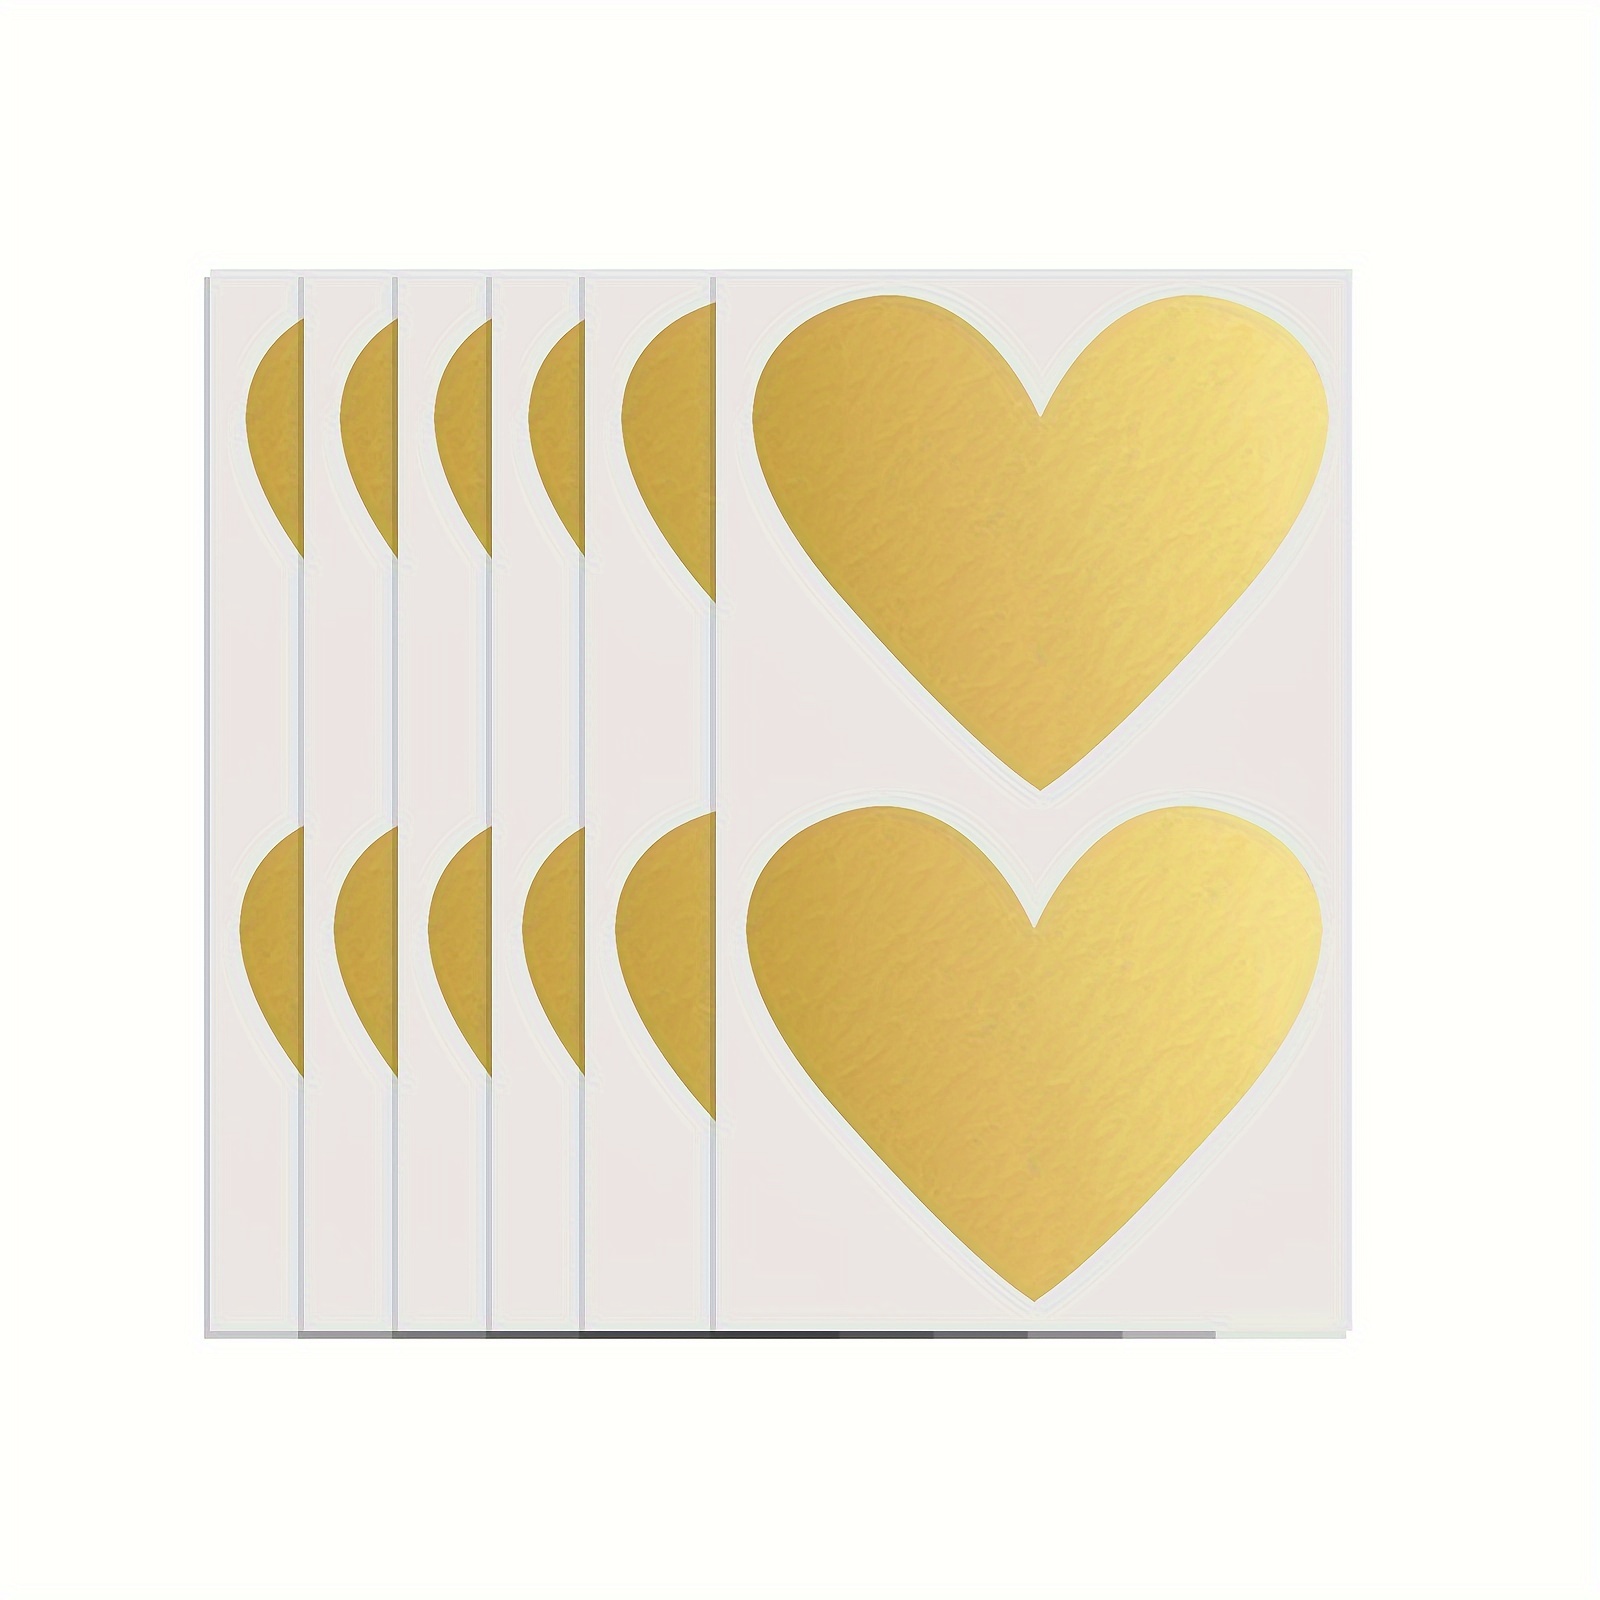 

30pcs/pack 6x7cm Golden Love Heart Shape Scraping Stickers Self-adhesive Labels, For Postcards, Greeting Cards, Promotional Tickets, Promotional Events, Wedding Event Gift Cards, Scraping Prize Cards